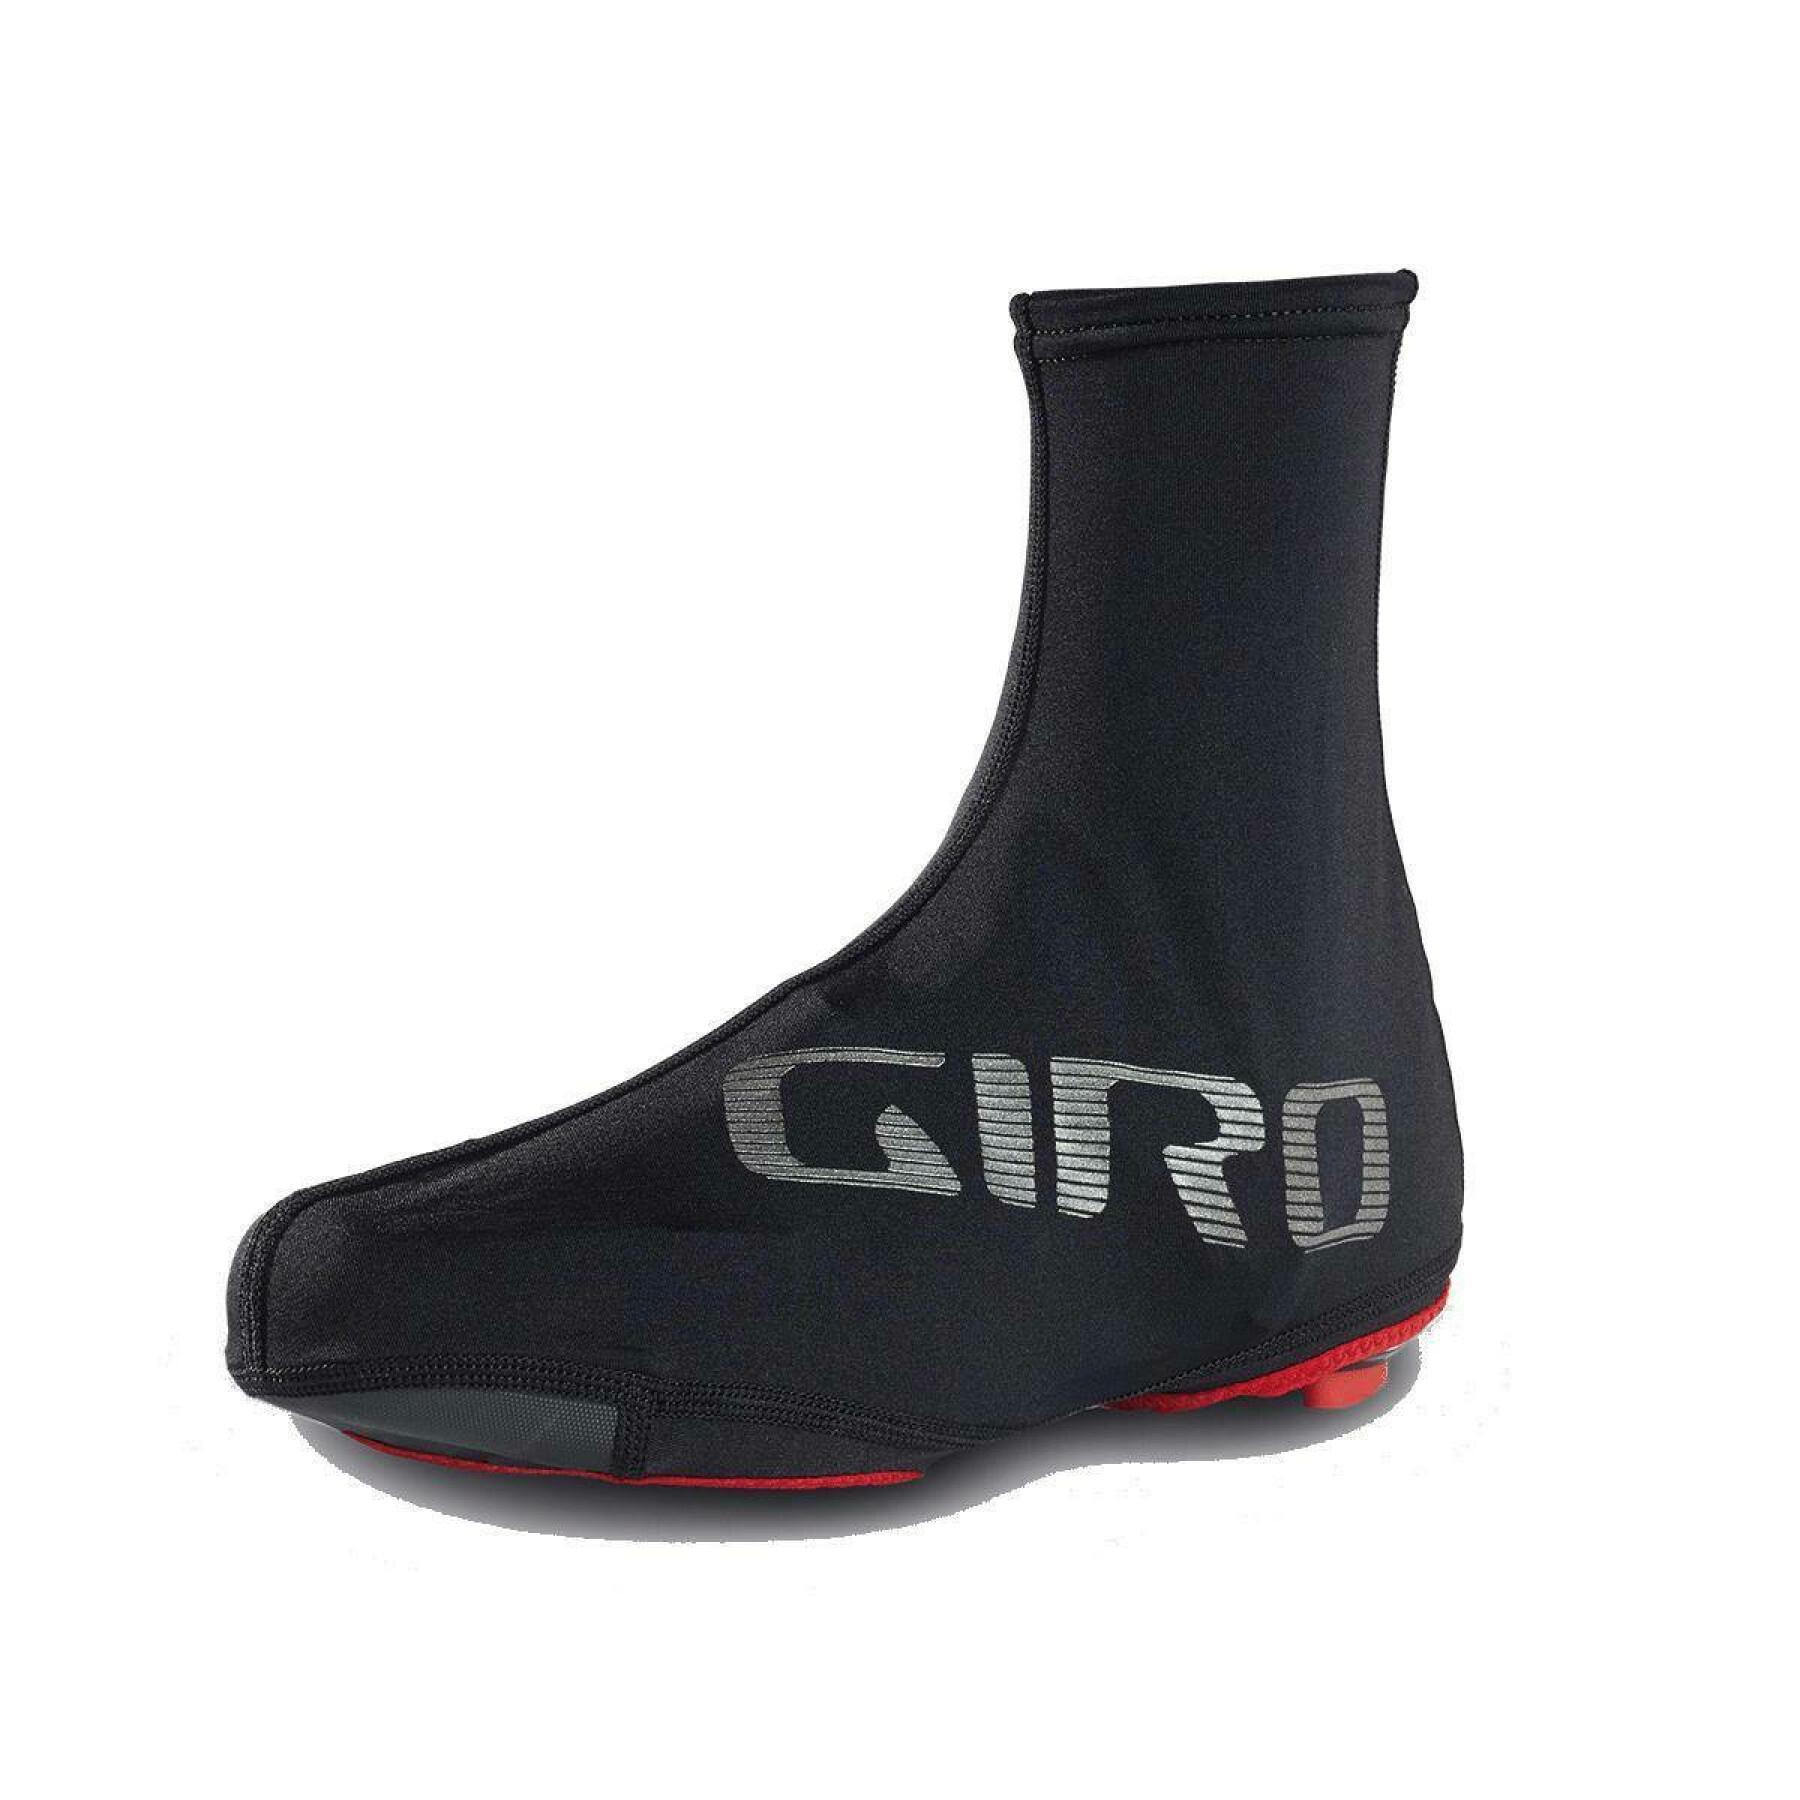 Couvre-chaussures Giro Ultralight Aero - Accessoires textile - Equipements  - Route